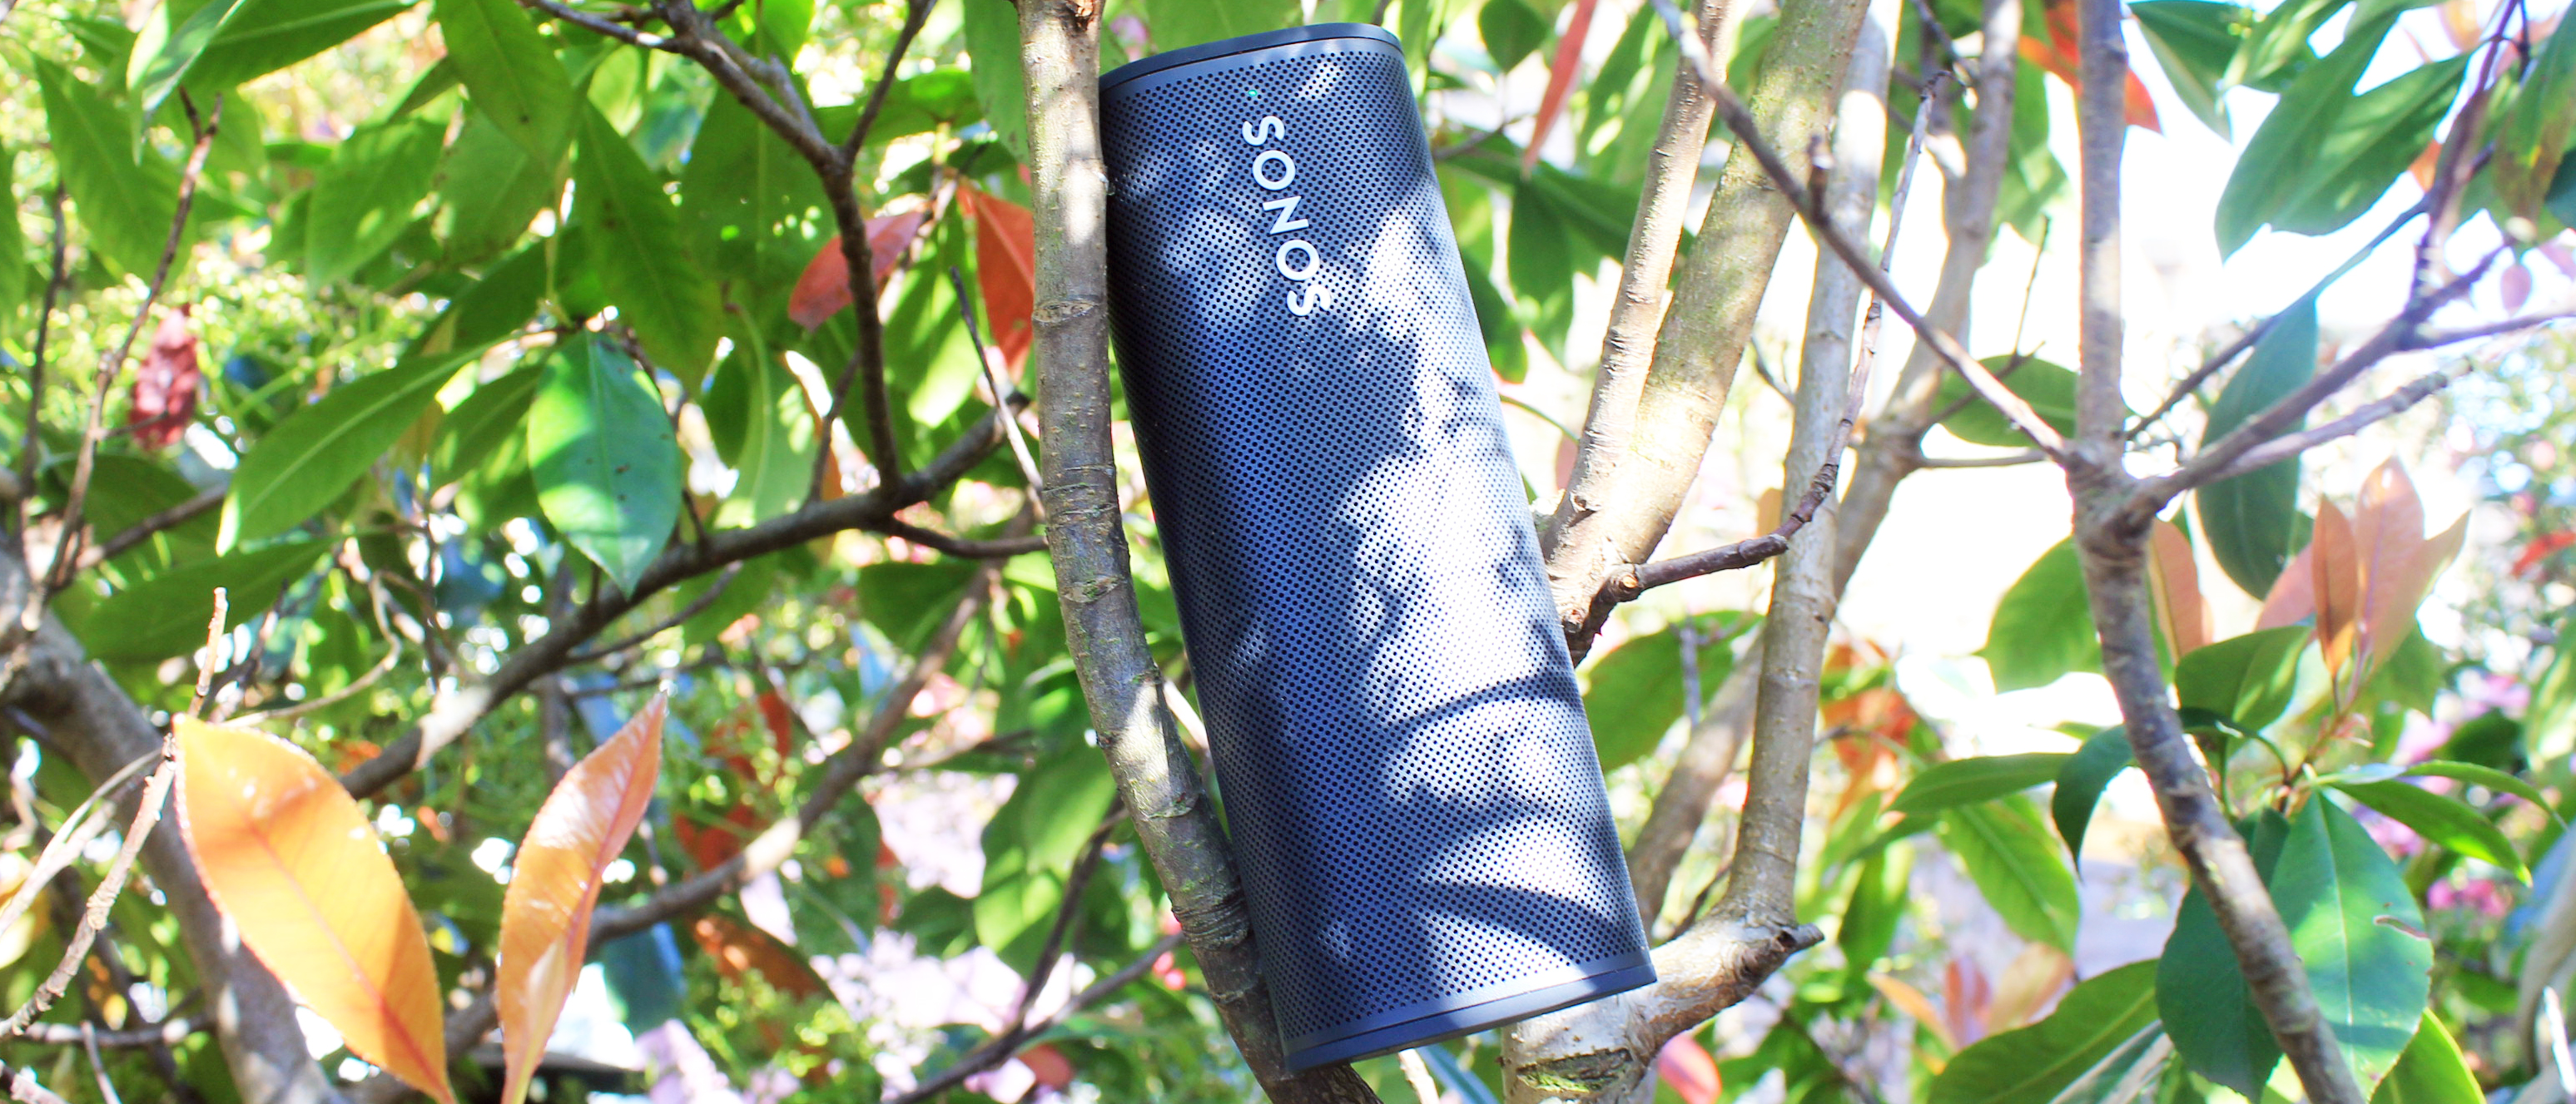 Sonos Roam Review: Portable Tunes for the Outdoors, Alexa for the